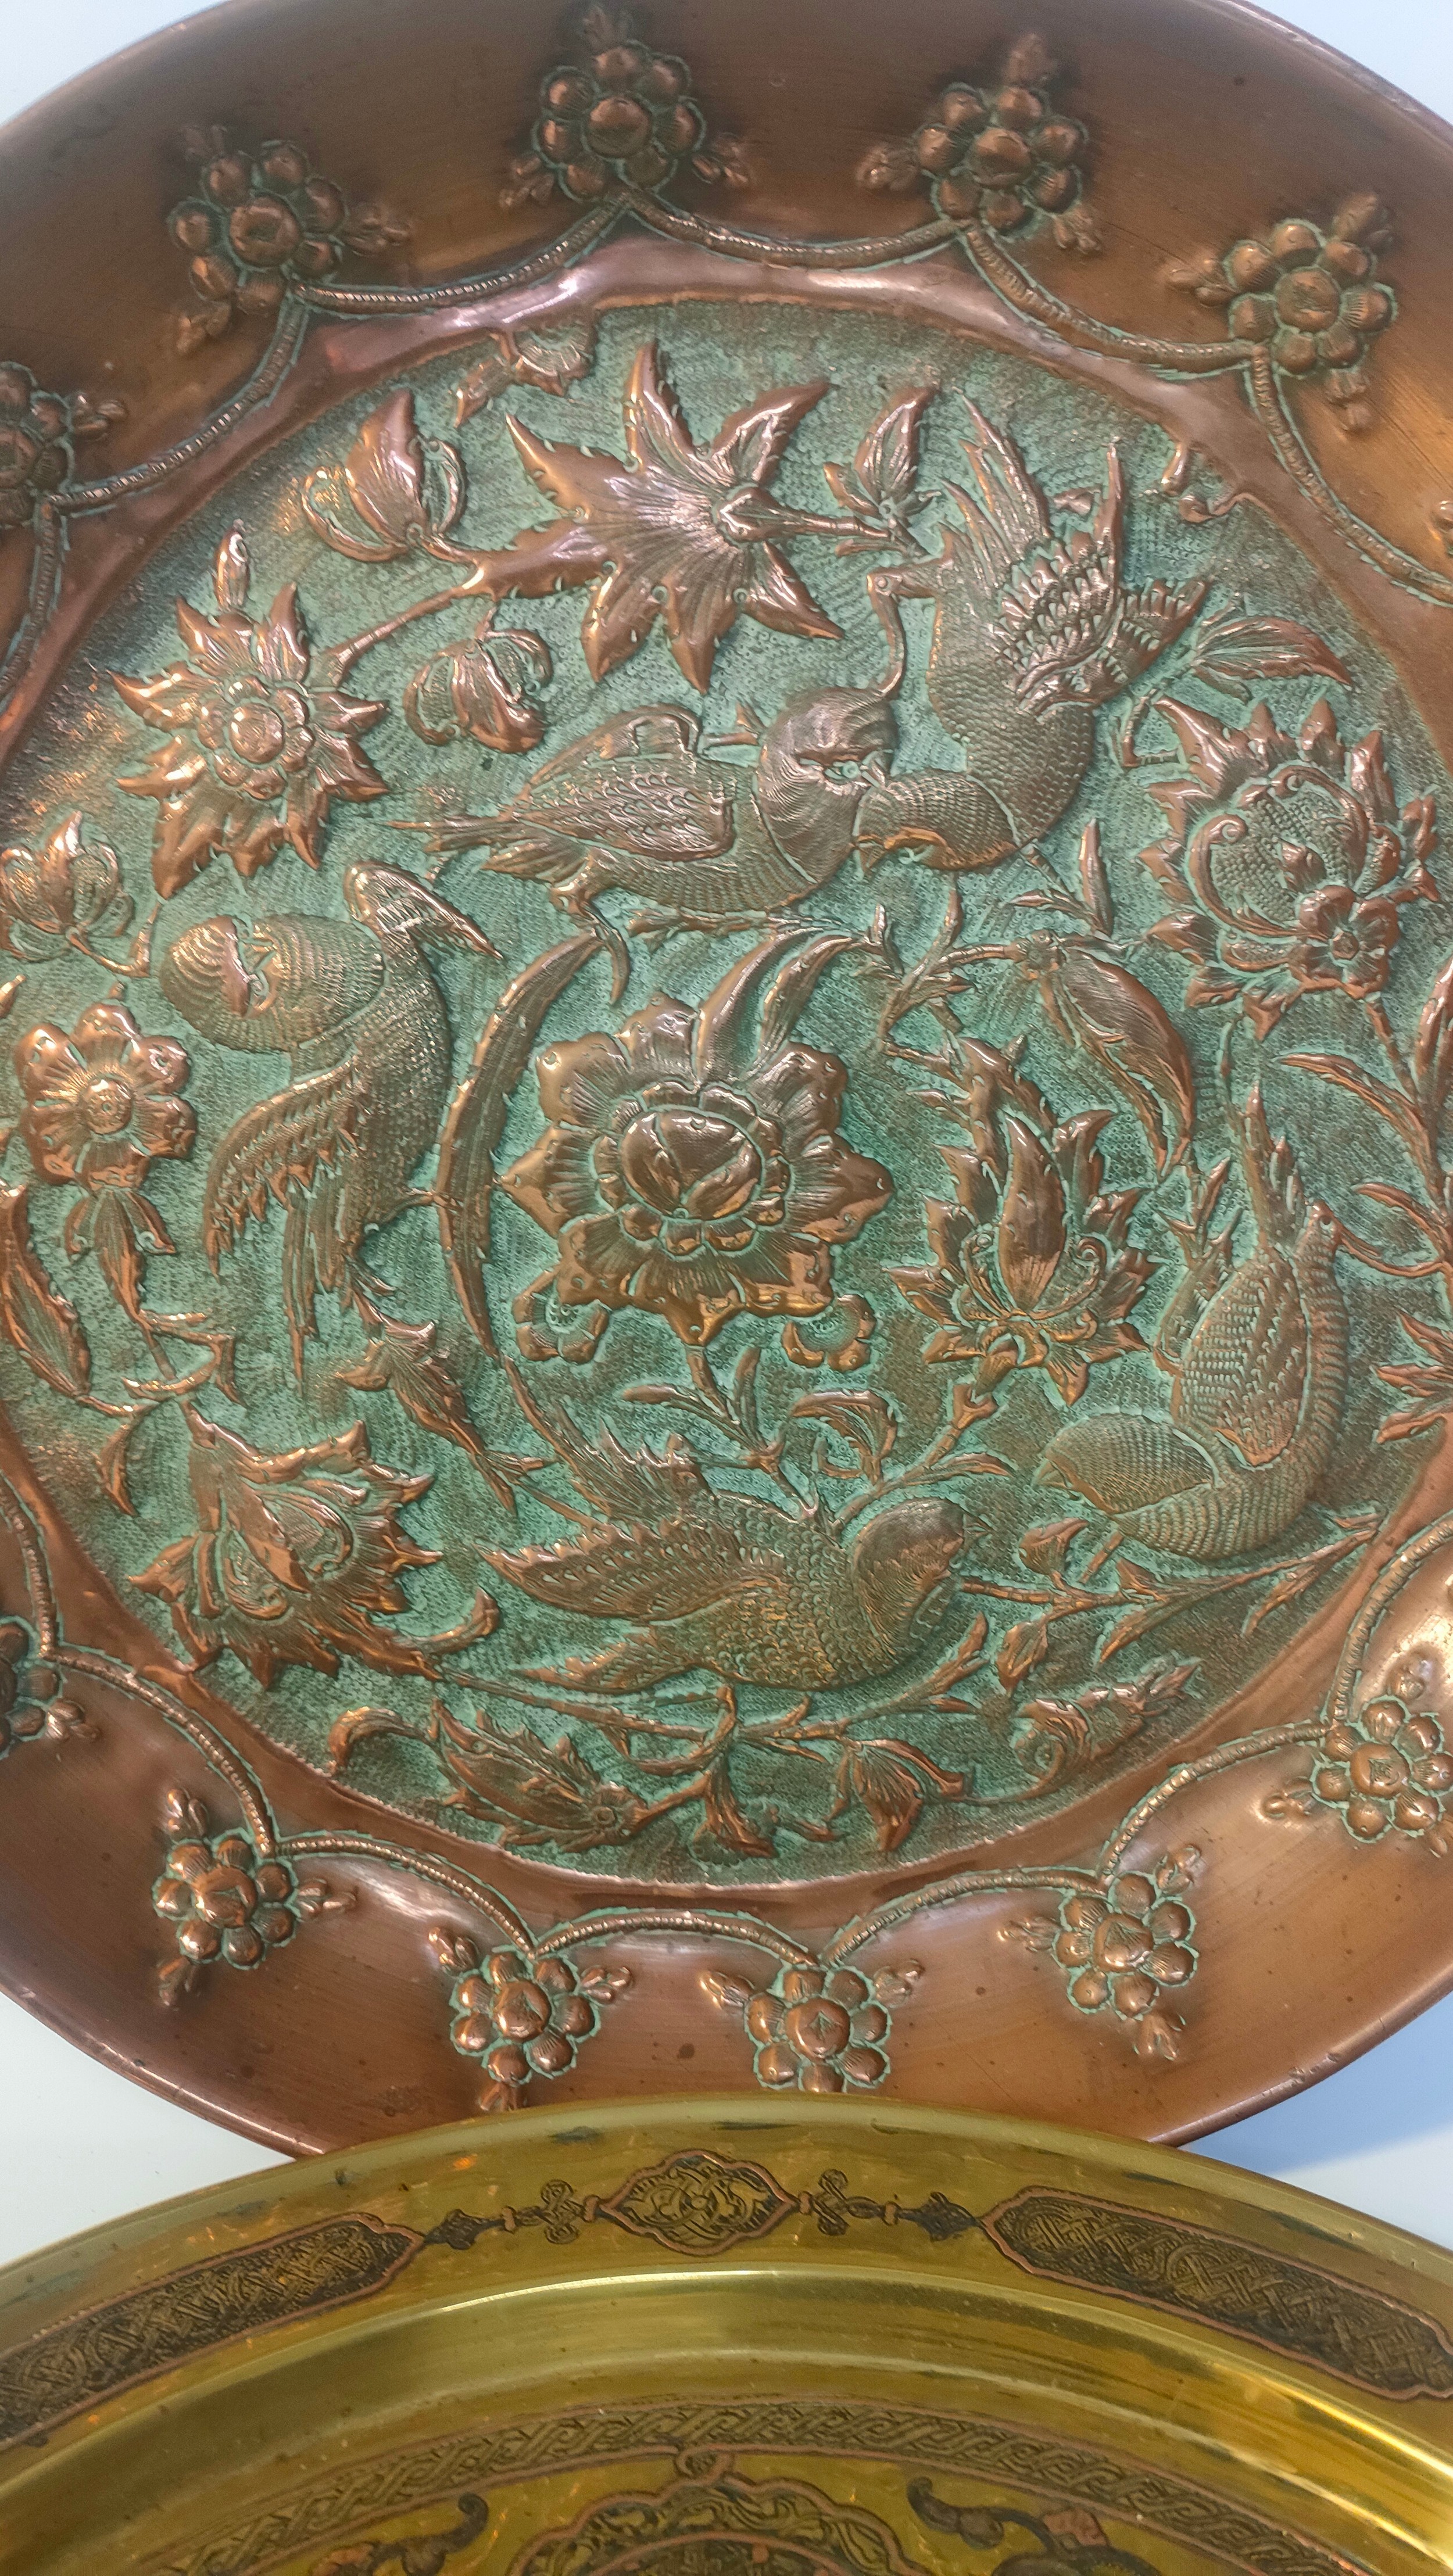 Two Antique Islamic 1900s trays; Brass & silver overlaid Islamic tray along with raised bird scene - Image 4 of 4